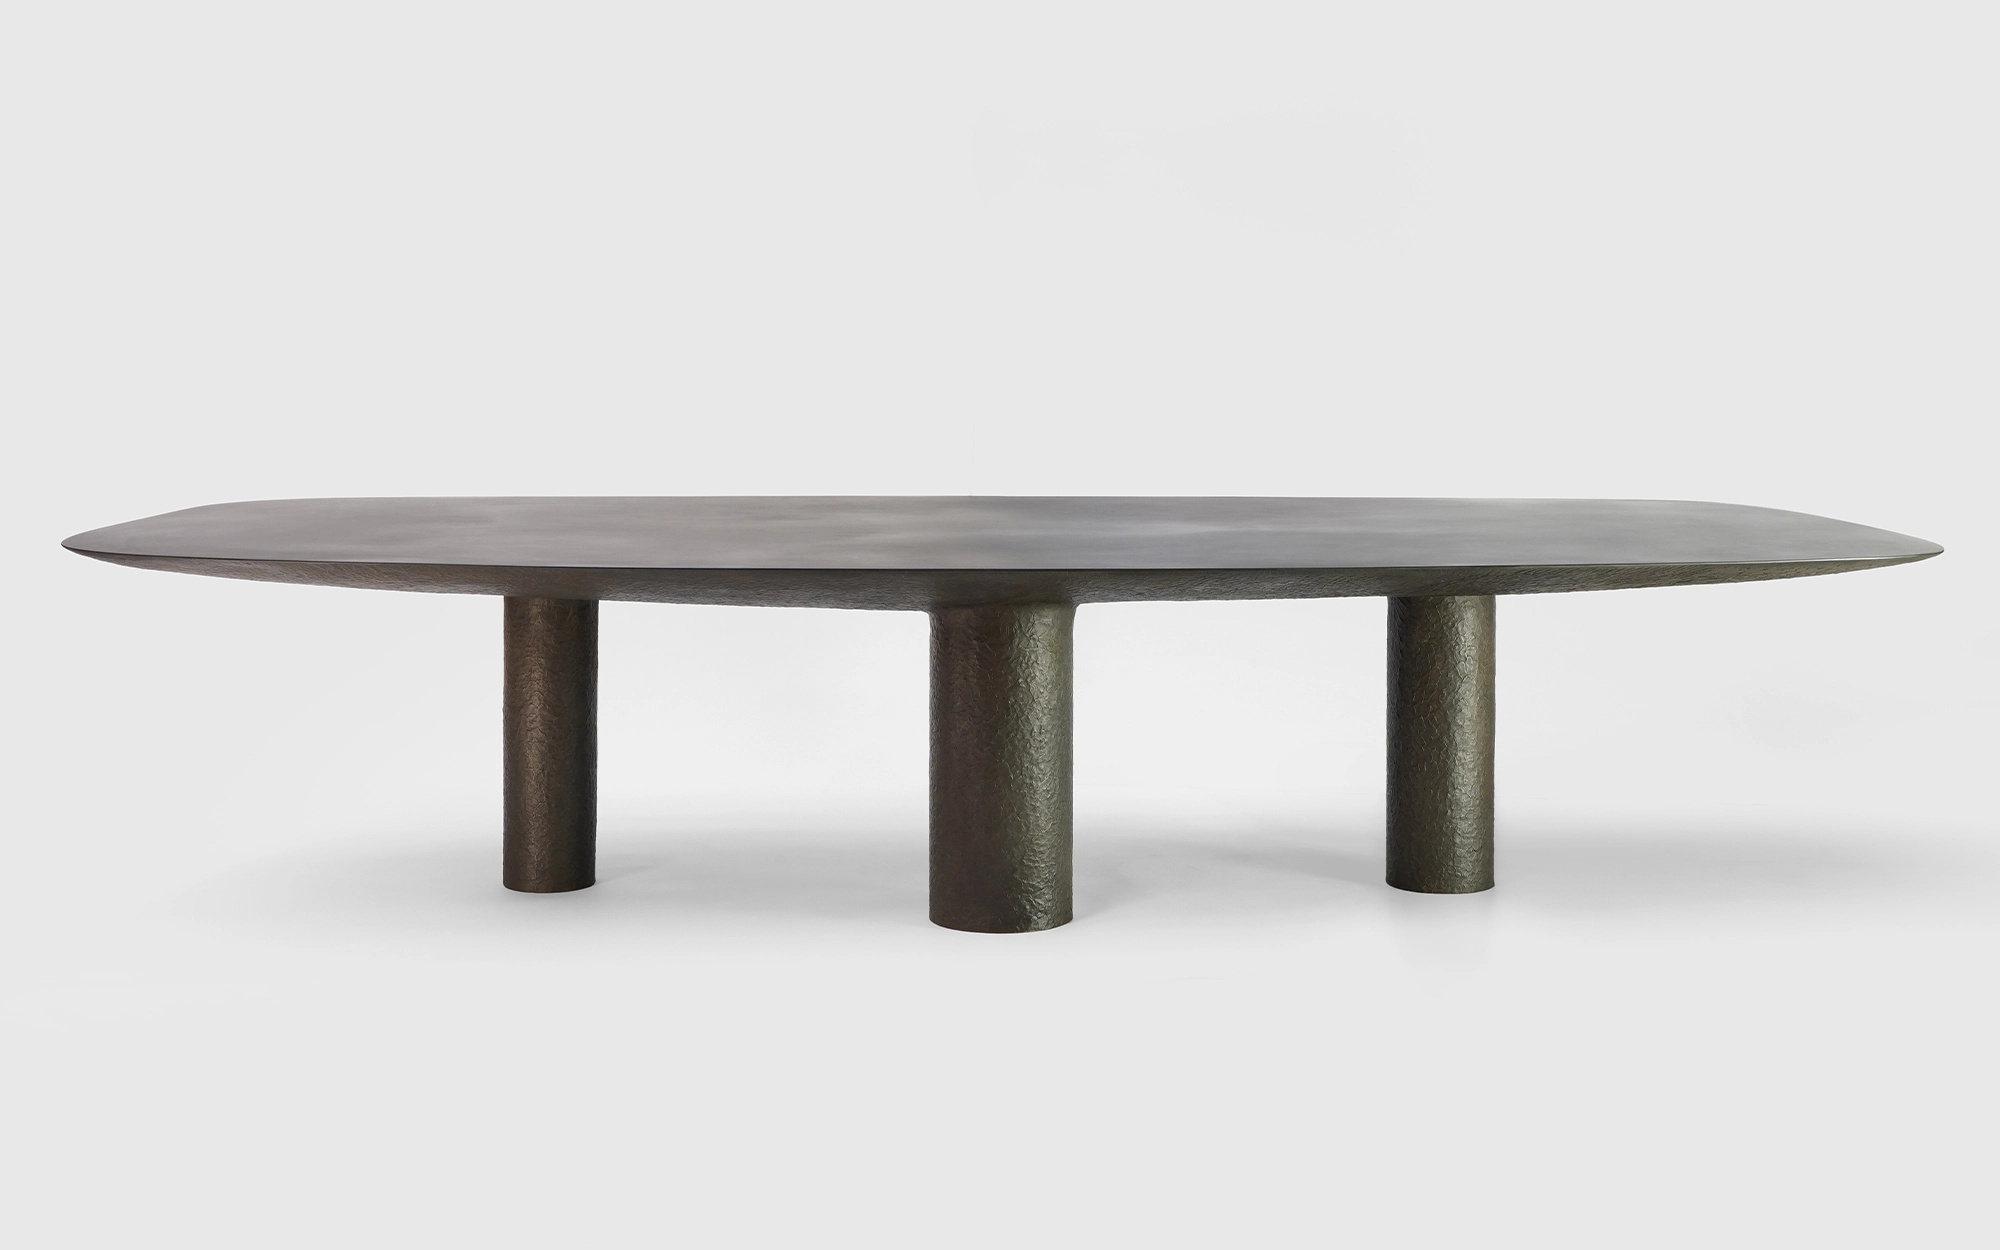 Table 365 - Guillaume Bardet - Coffee table - Galerie kreo